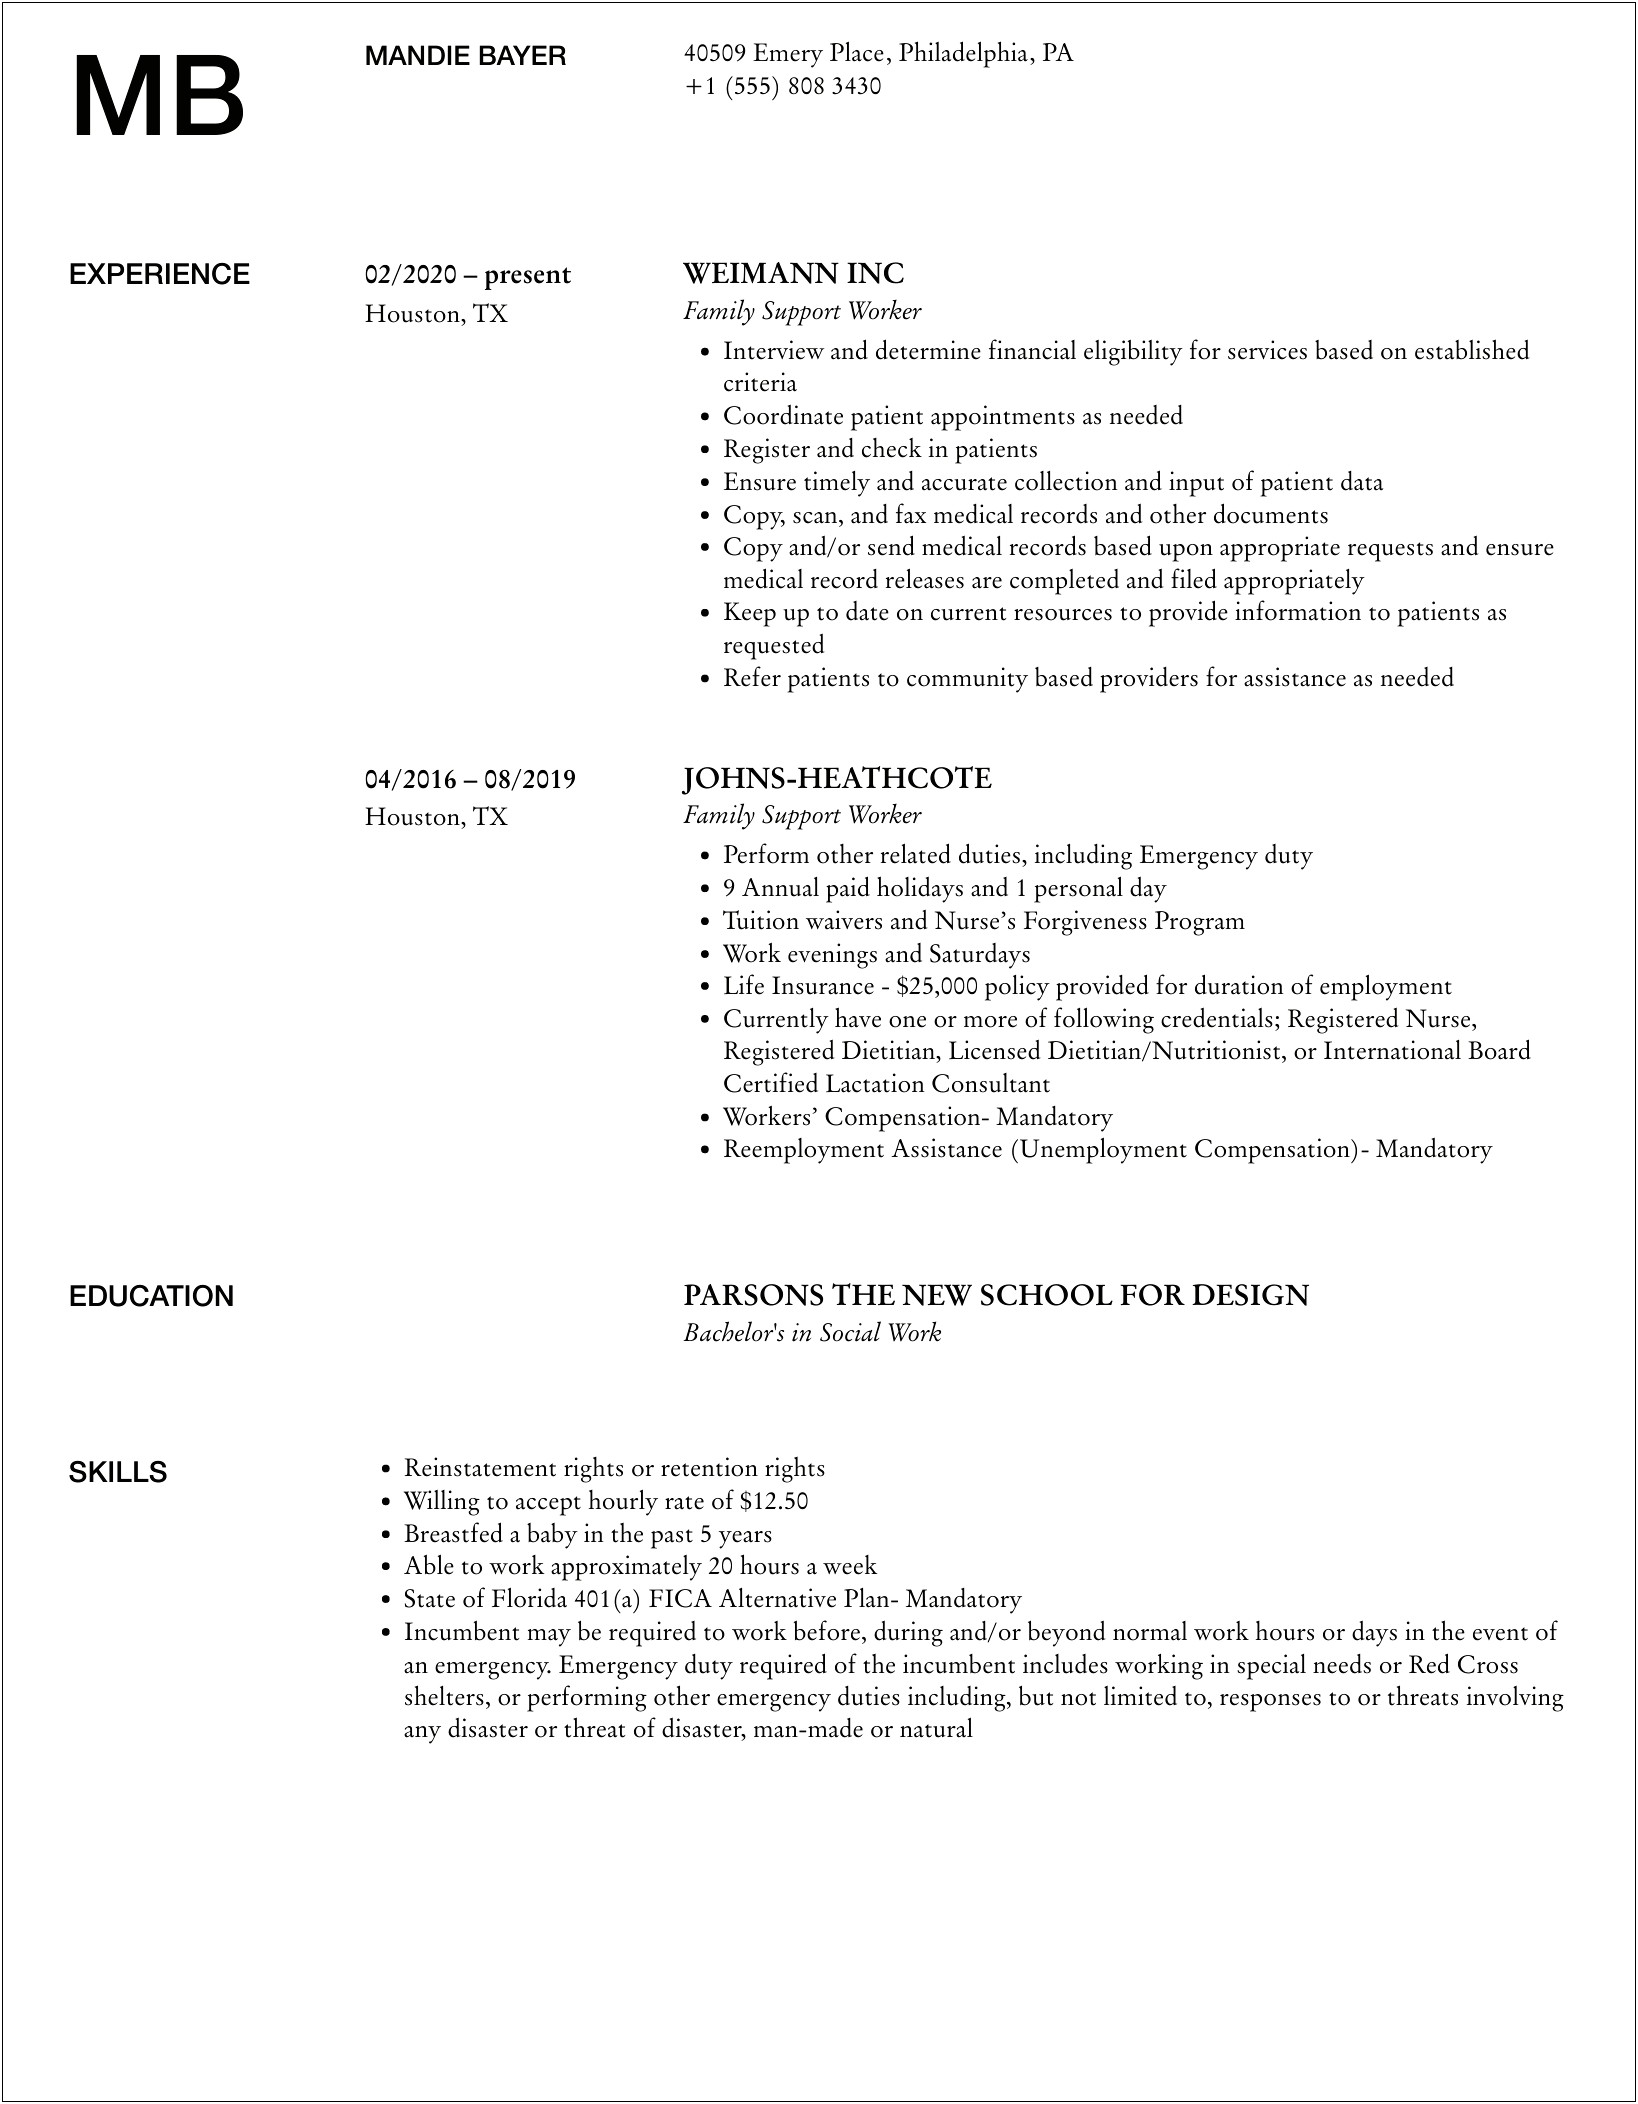 Work Experience Resume For Family Support Worker